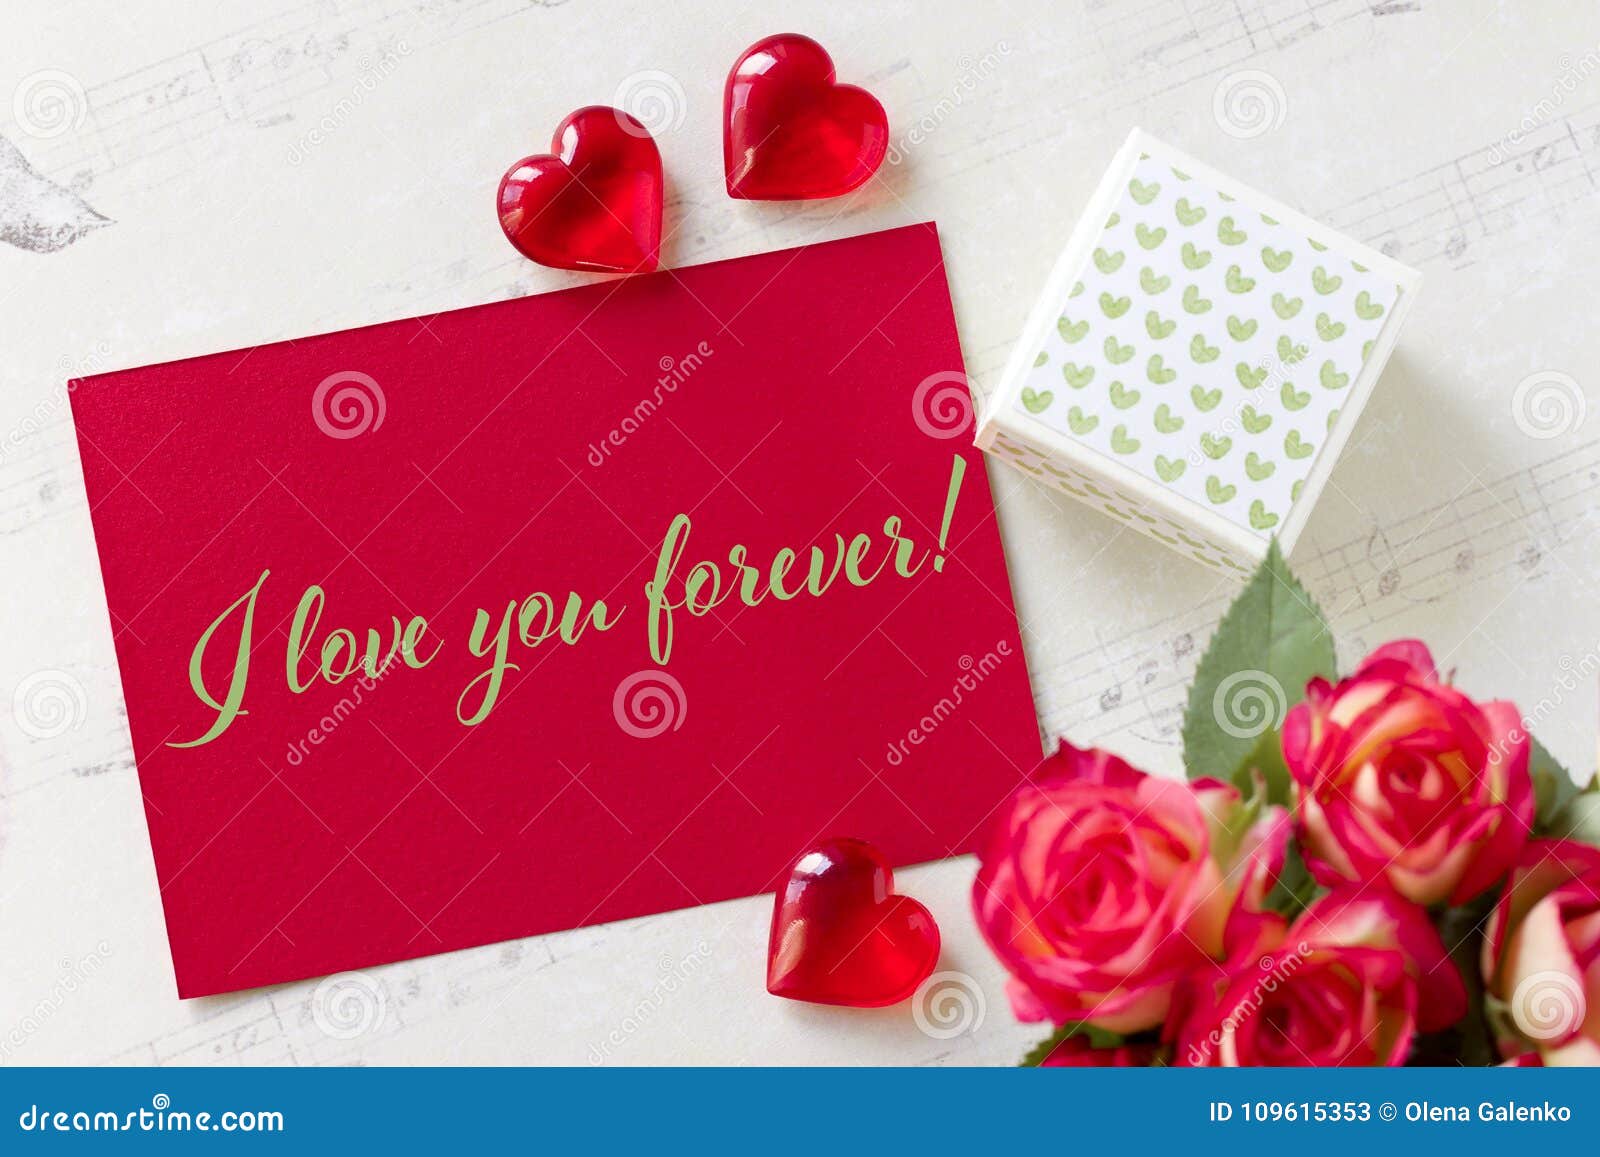 395 I Love You Forever Photos Free Royalty Free Stock Photos From Dreamstime